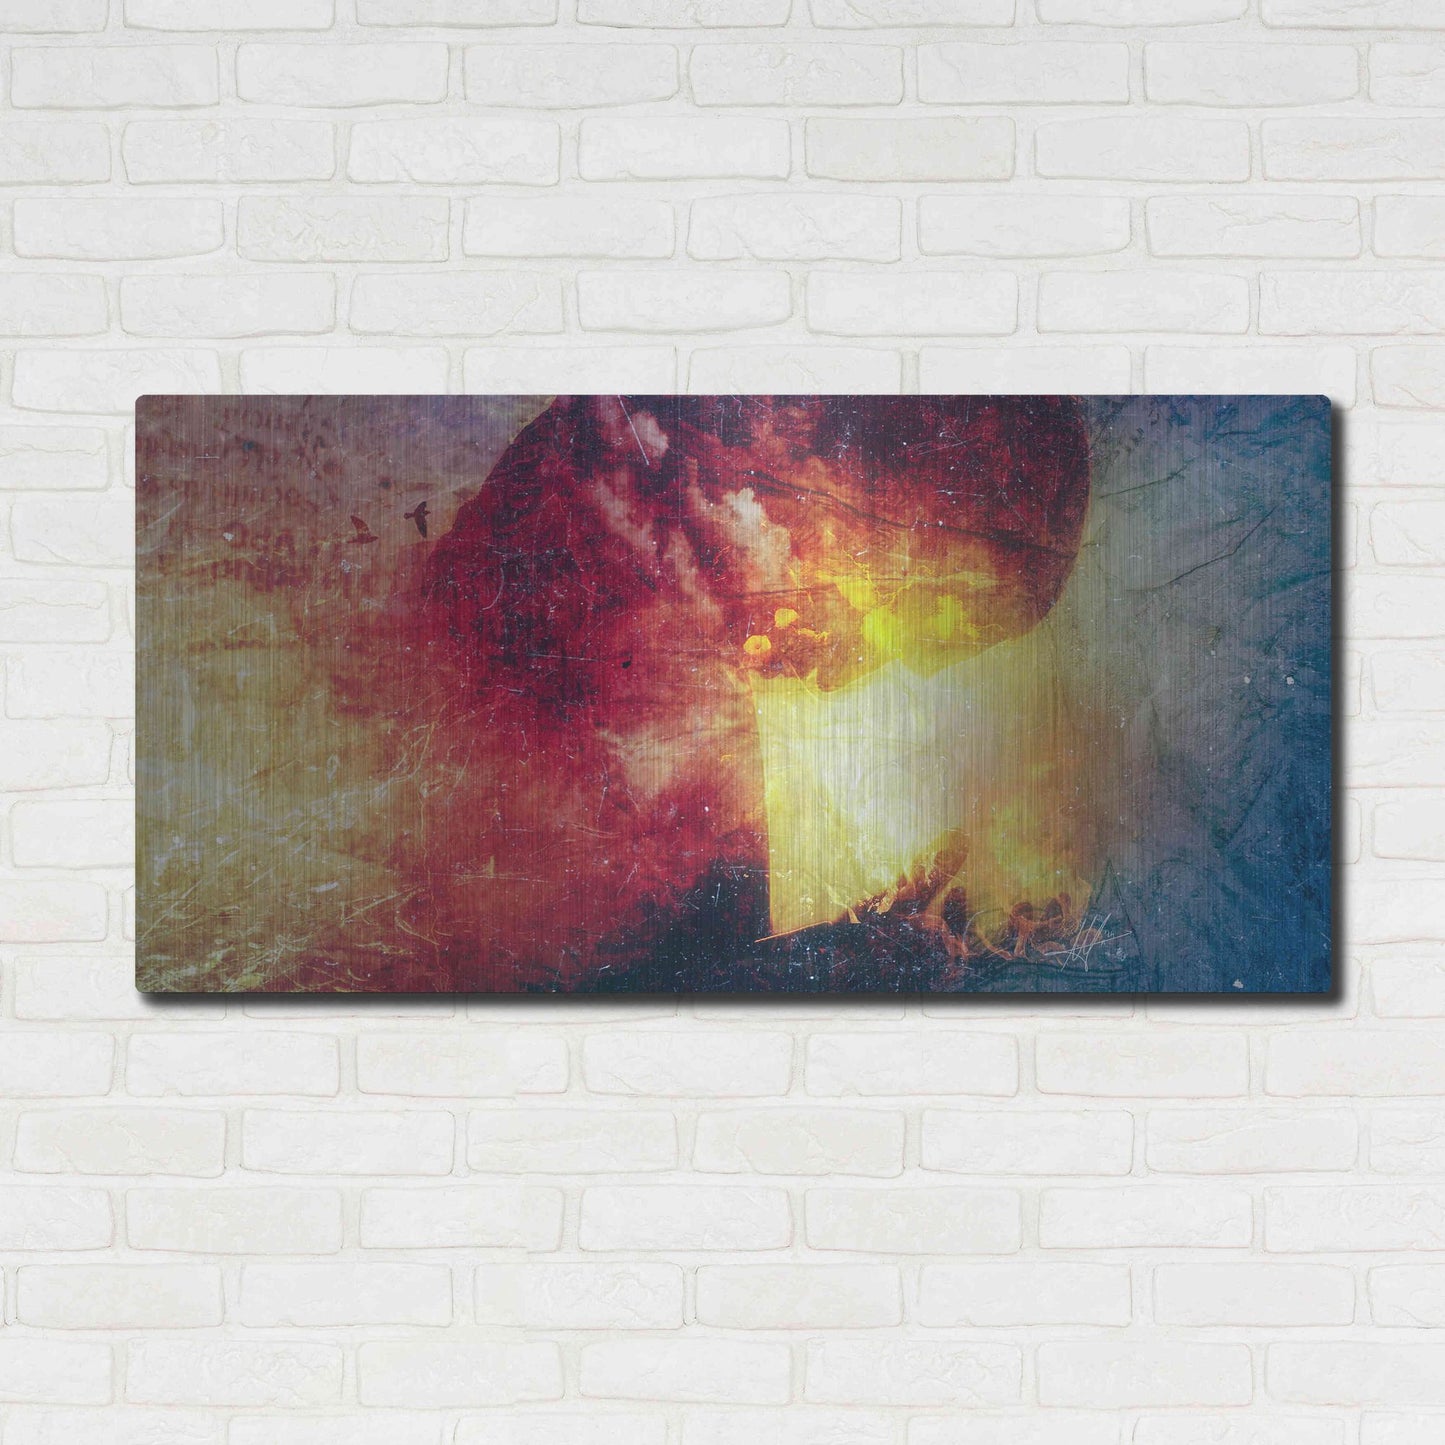 Luxe Metal Art 'The Earth Will Be Yours' by Mario Sanchez Nevado, Metal Wall Art,48x24